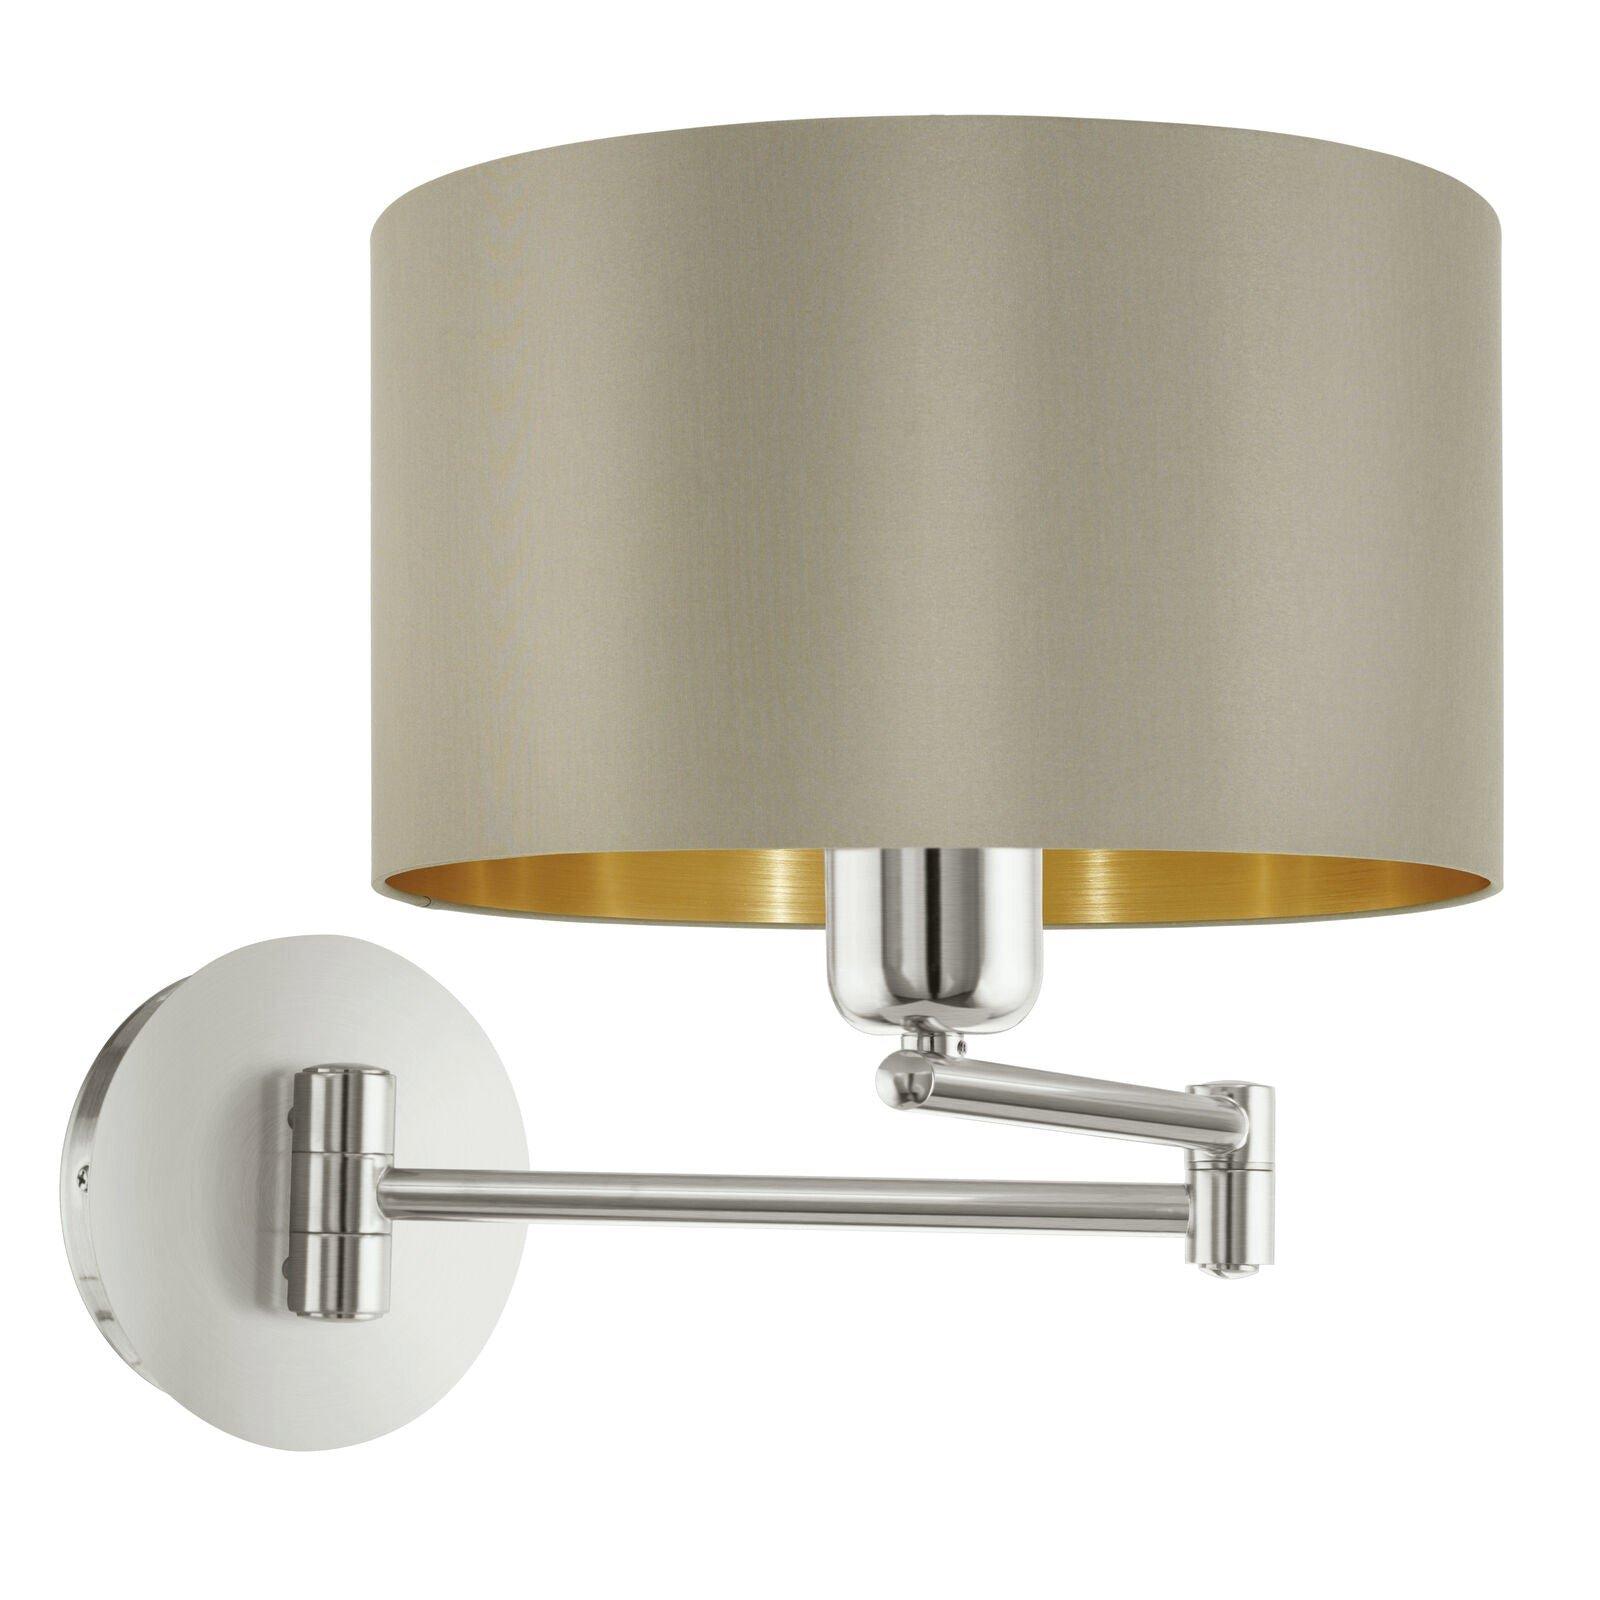 Wall Light Satin Nickel Moveable Stem Shade Taupe Gold Fabric Bulb E27 1x60W